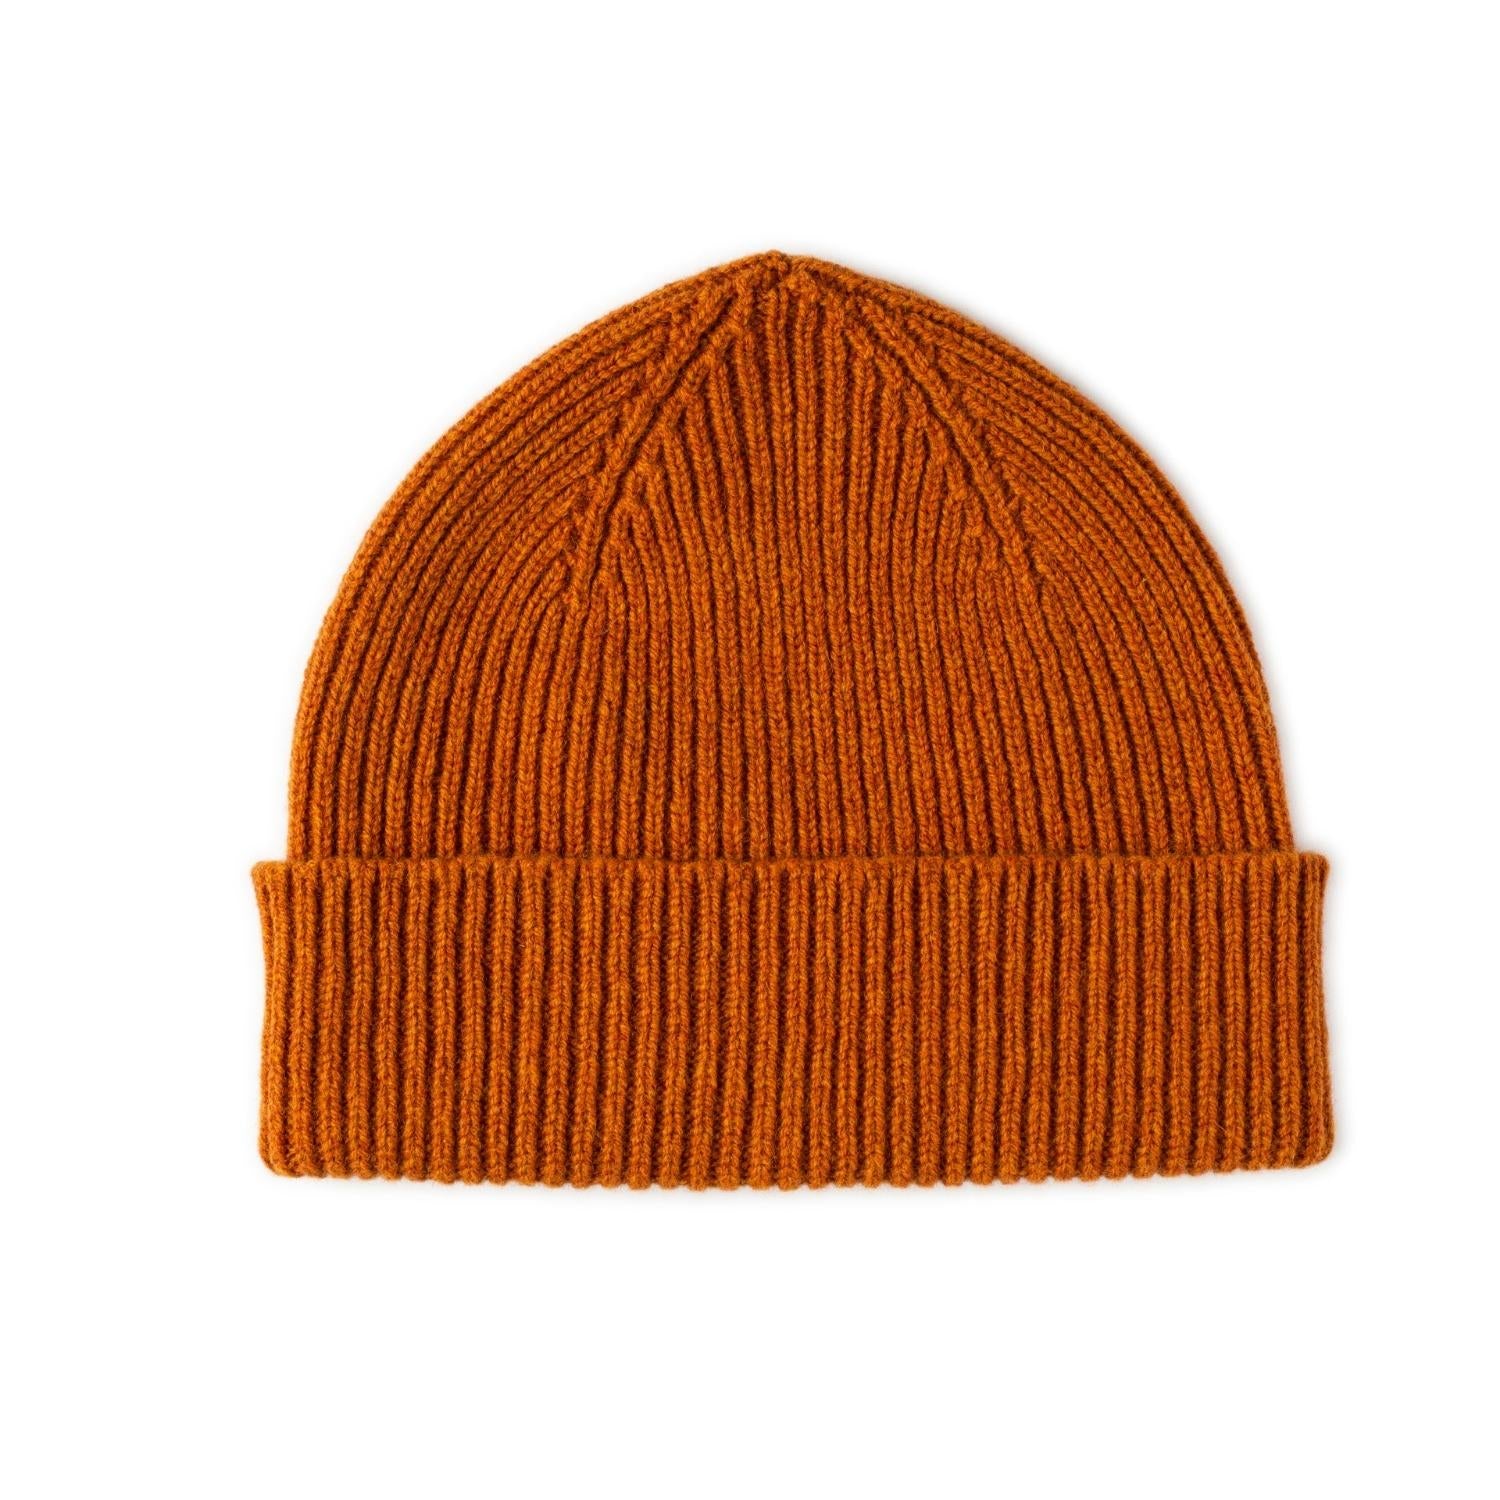 Lambswool beanie - Ribbed beanie hat for men and women - Orange